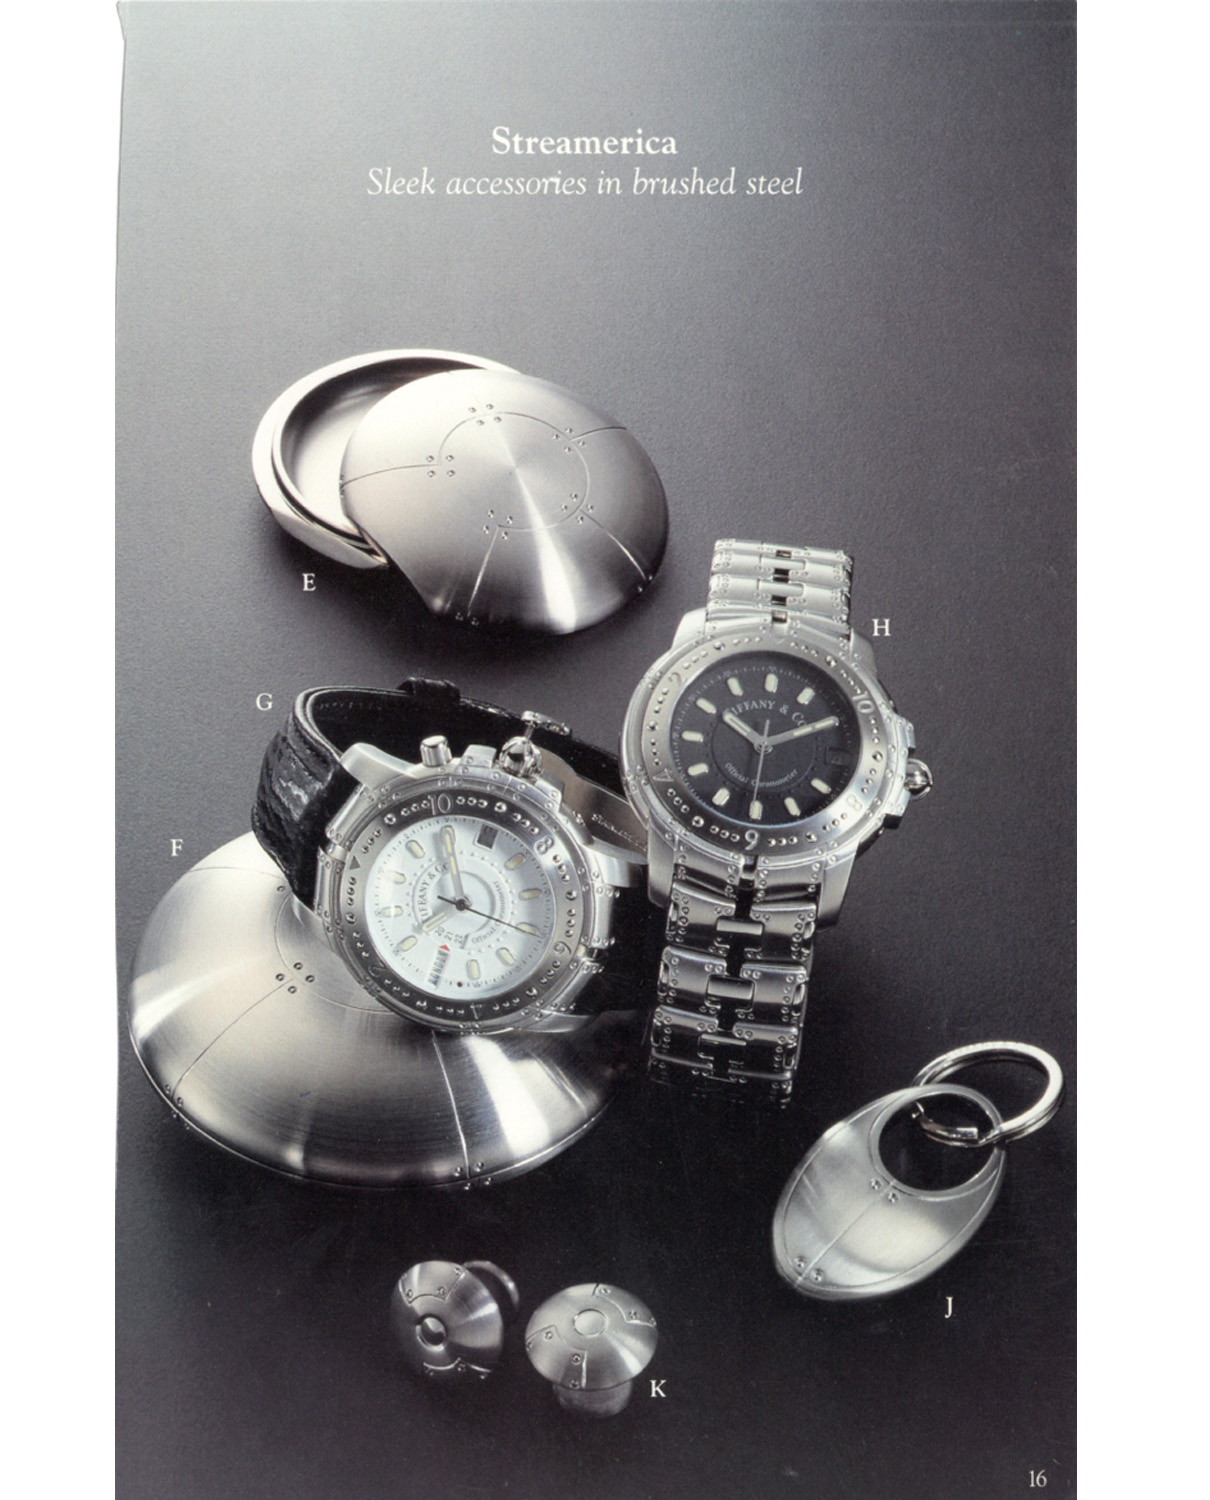 Tiffany & Co. Blue Book Catalog from the late 90's Perisphere Nesting Boxes, the World Timer Automatic Watch leather band, the Automatic Chronometer in all brushed steel band, the geodome cufflinks, and the Curviline key ring.